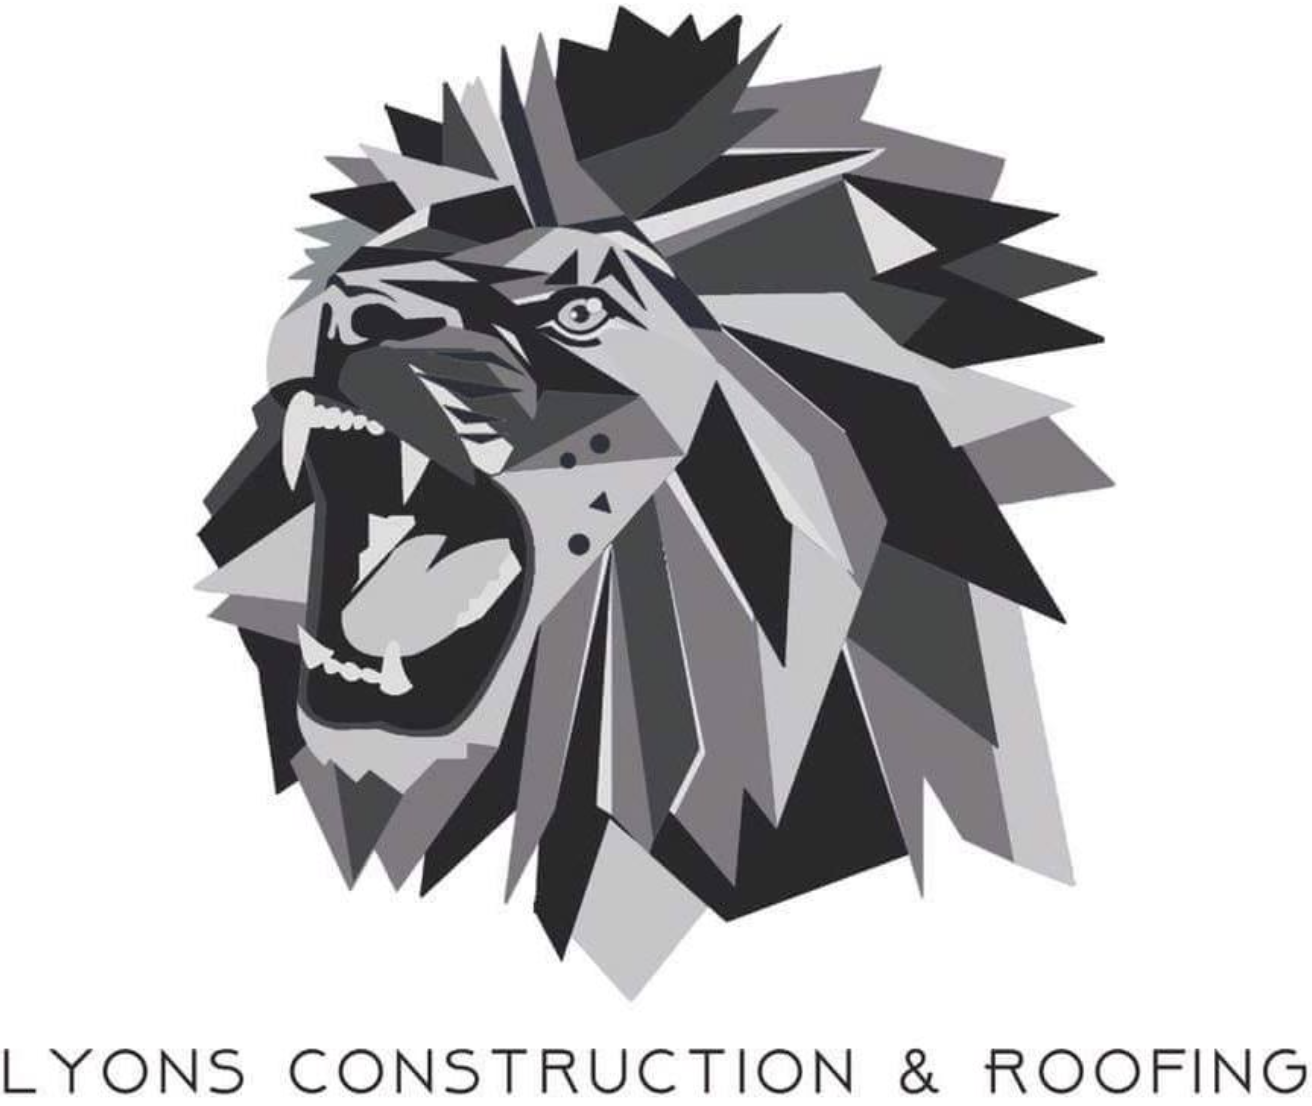 Lyons Construction & Roofing